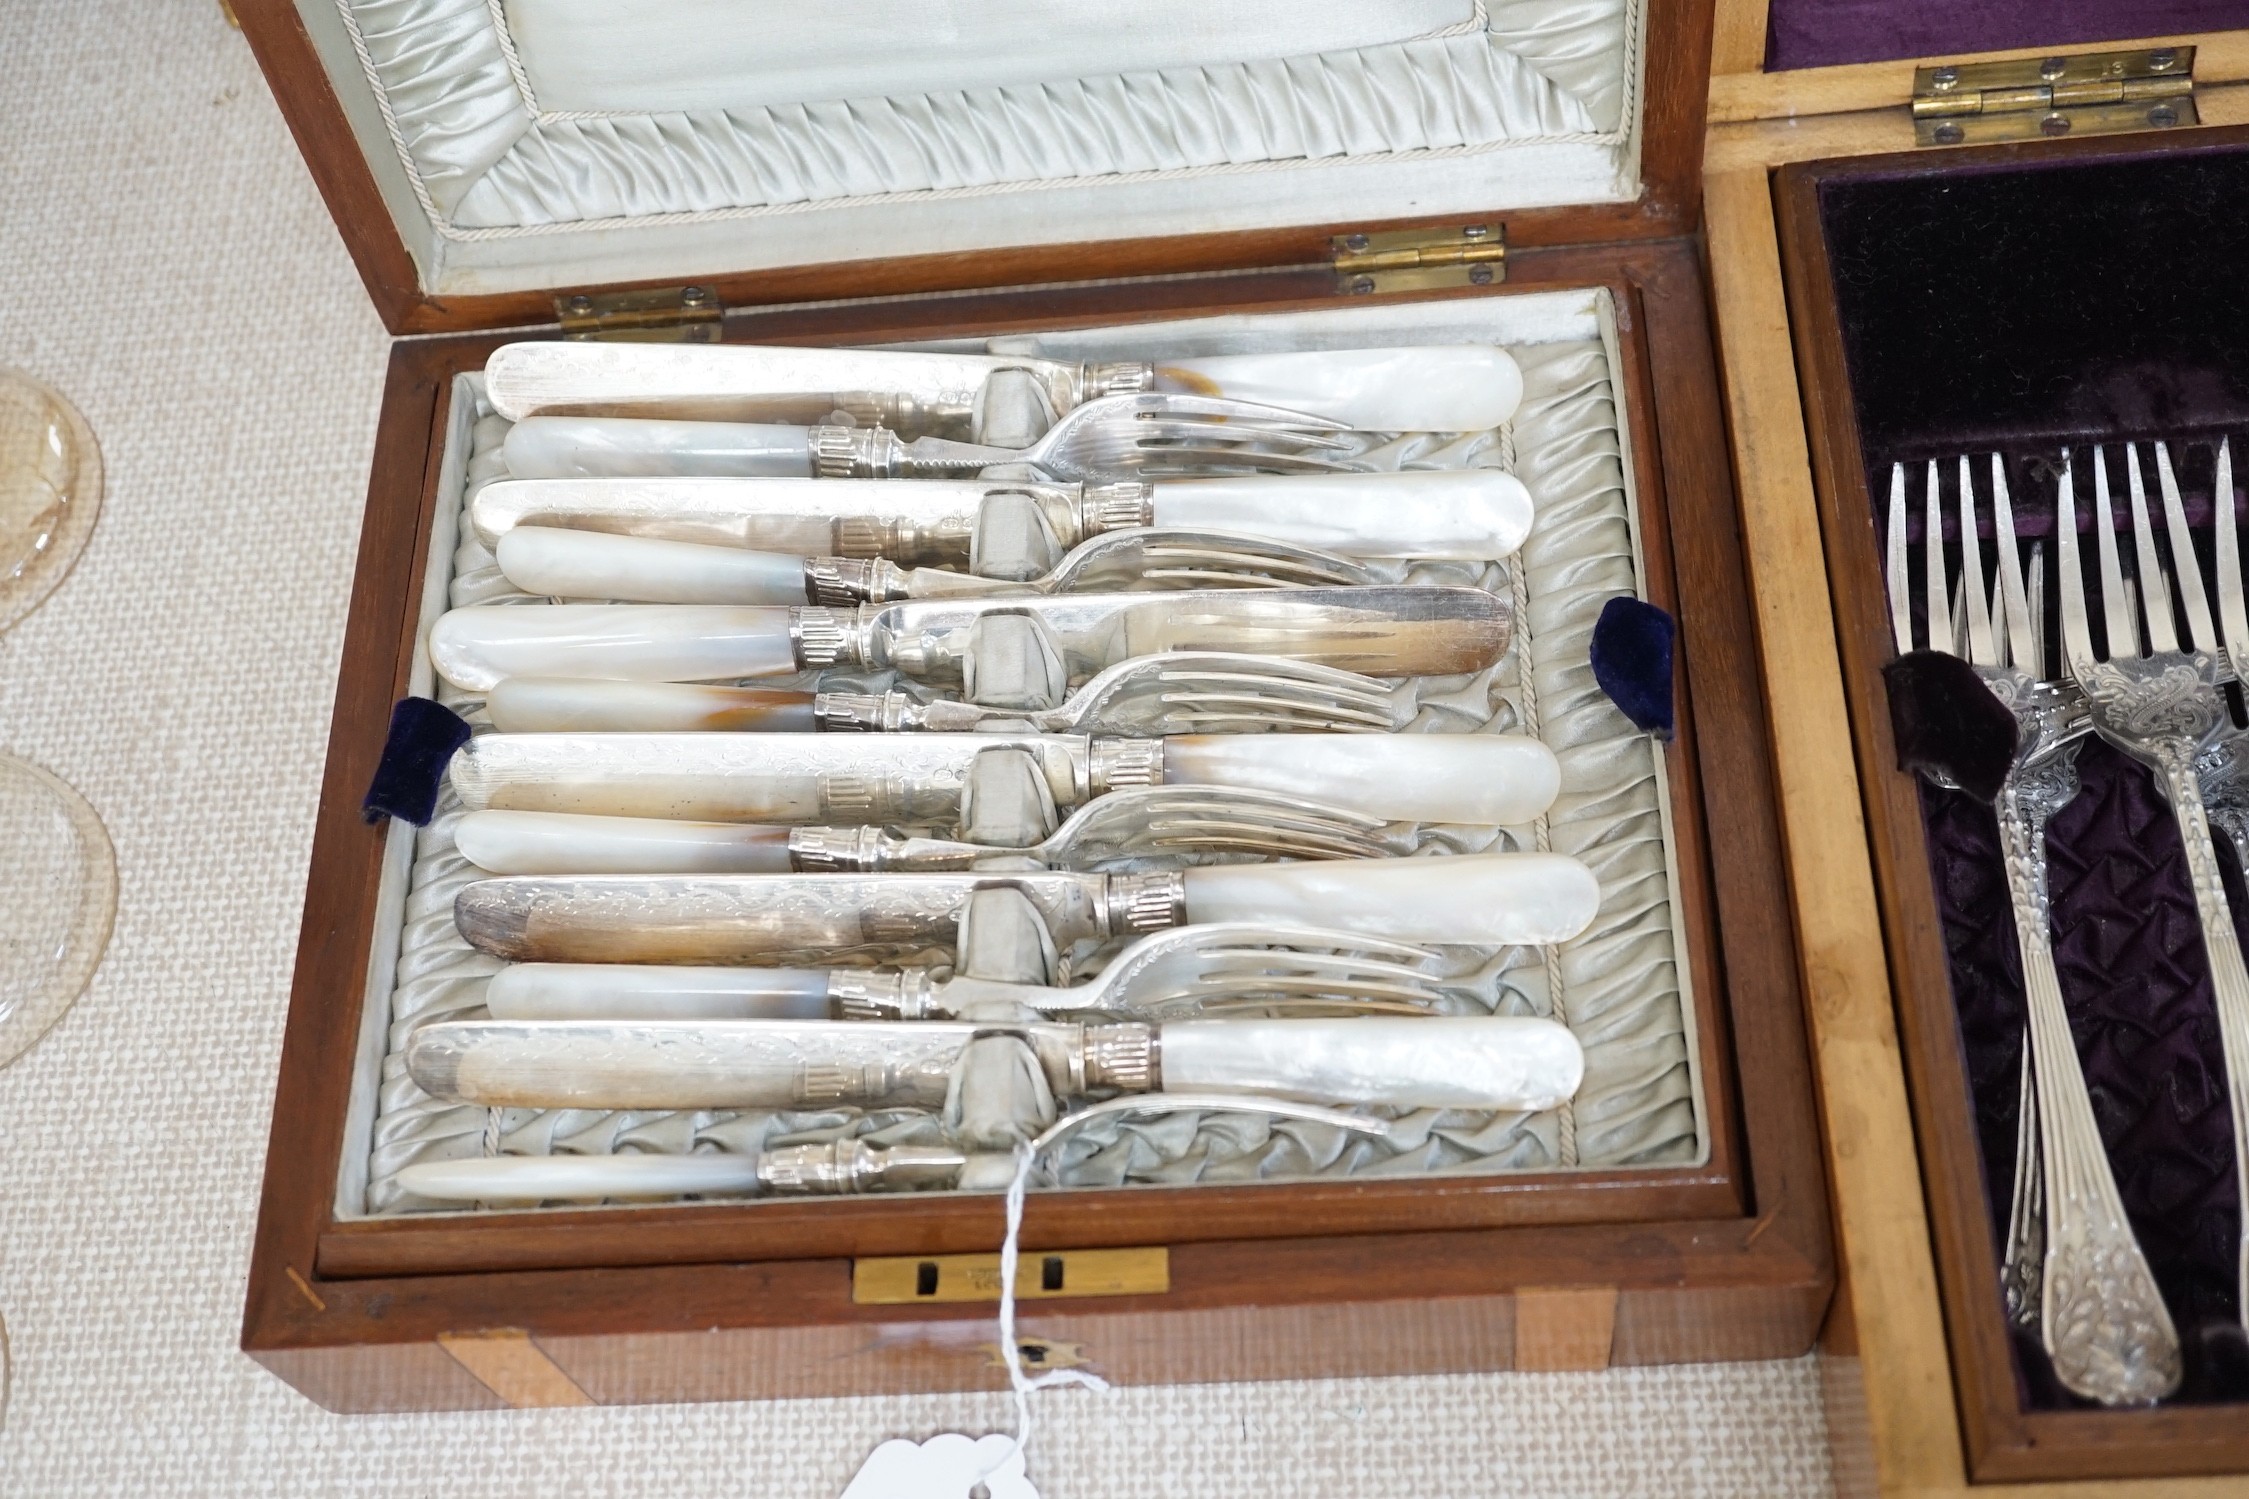 Two cased electroplate sets: a set of twelve fruit eaters and twelve fish knives and forks